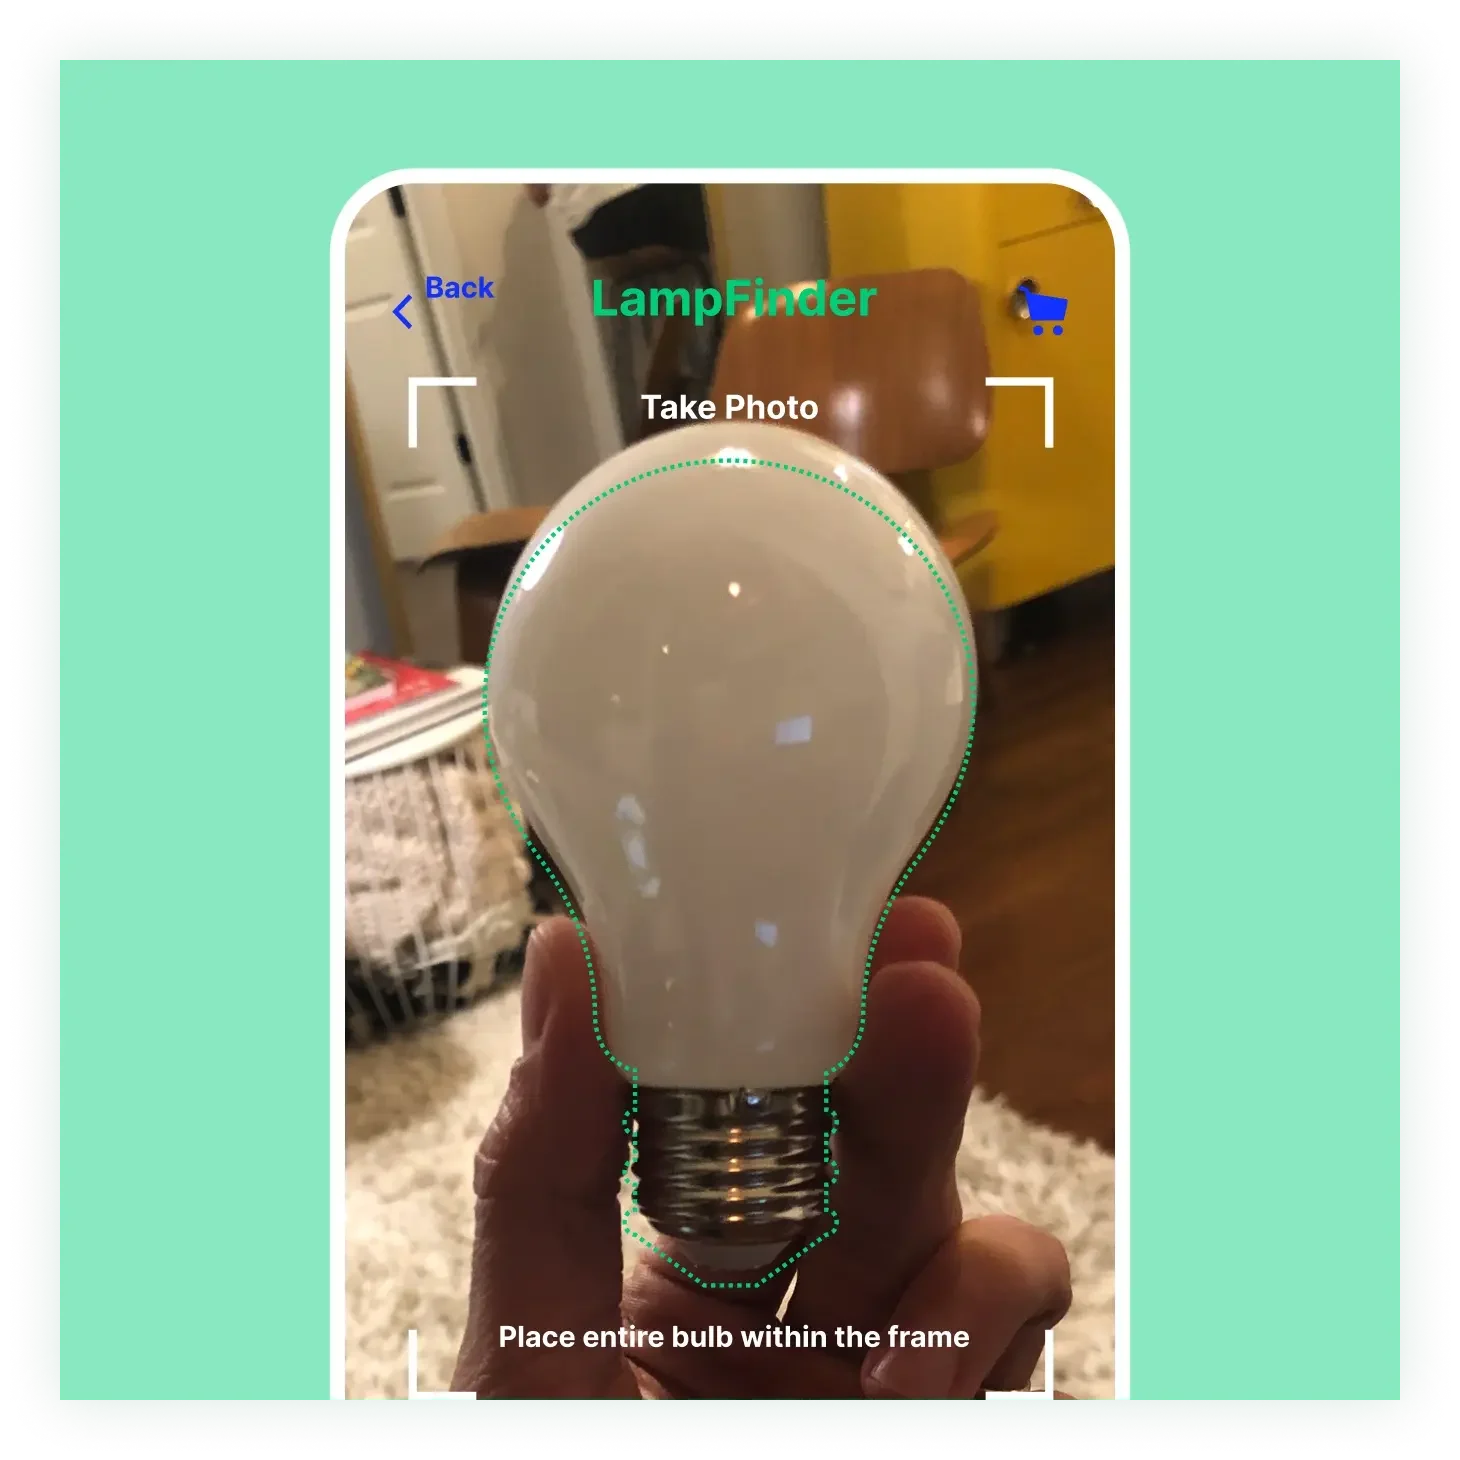 Find the perfect bulb for your home with Philips Lightfinder